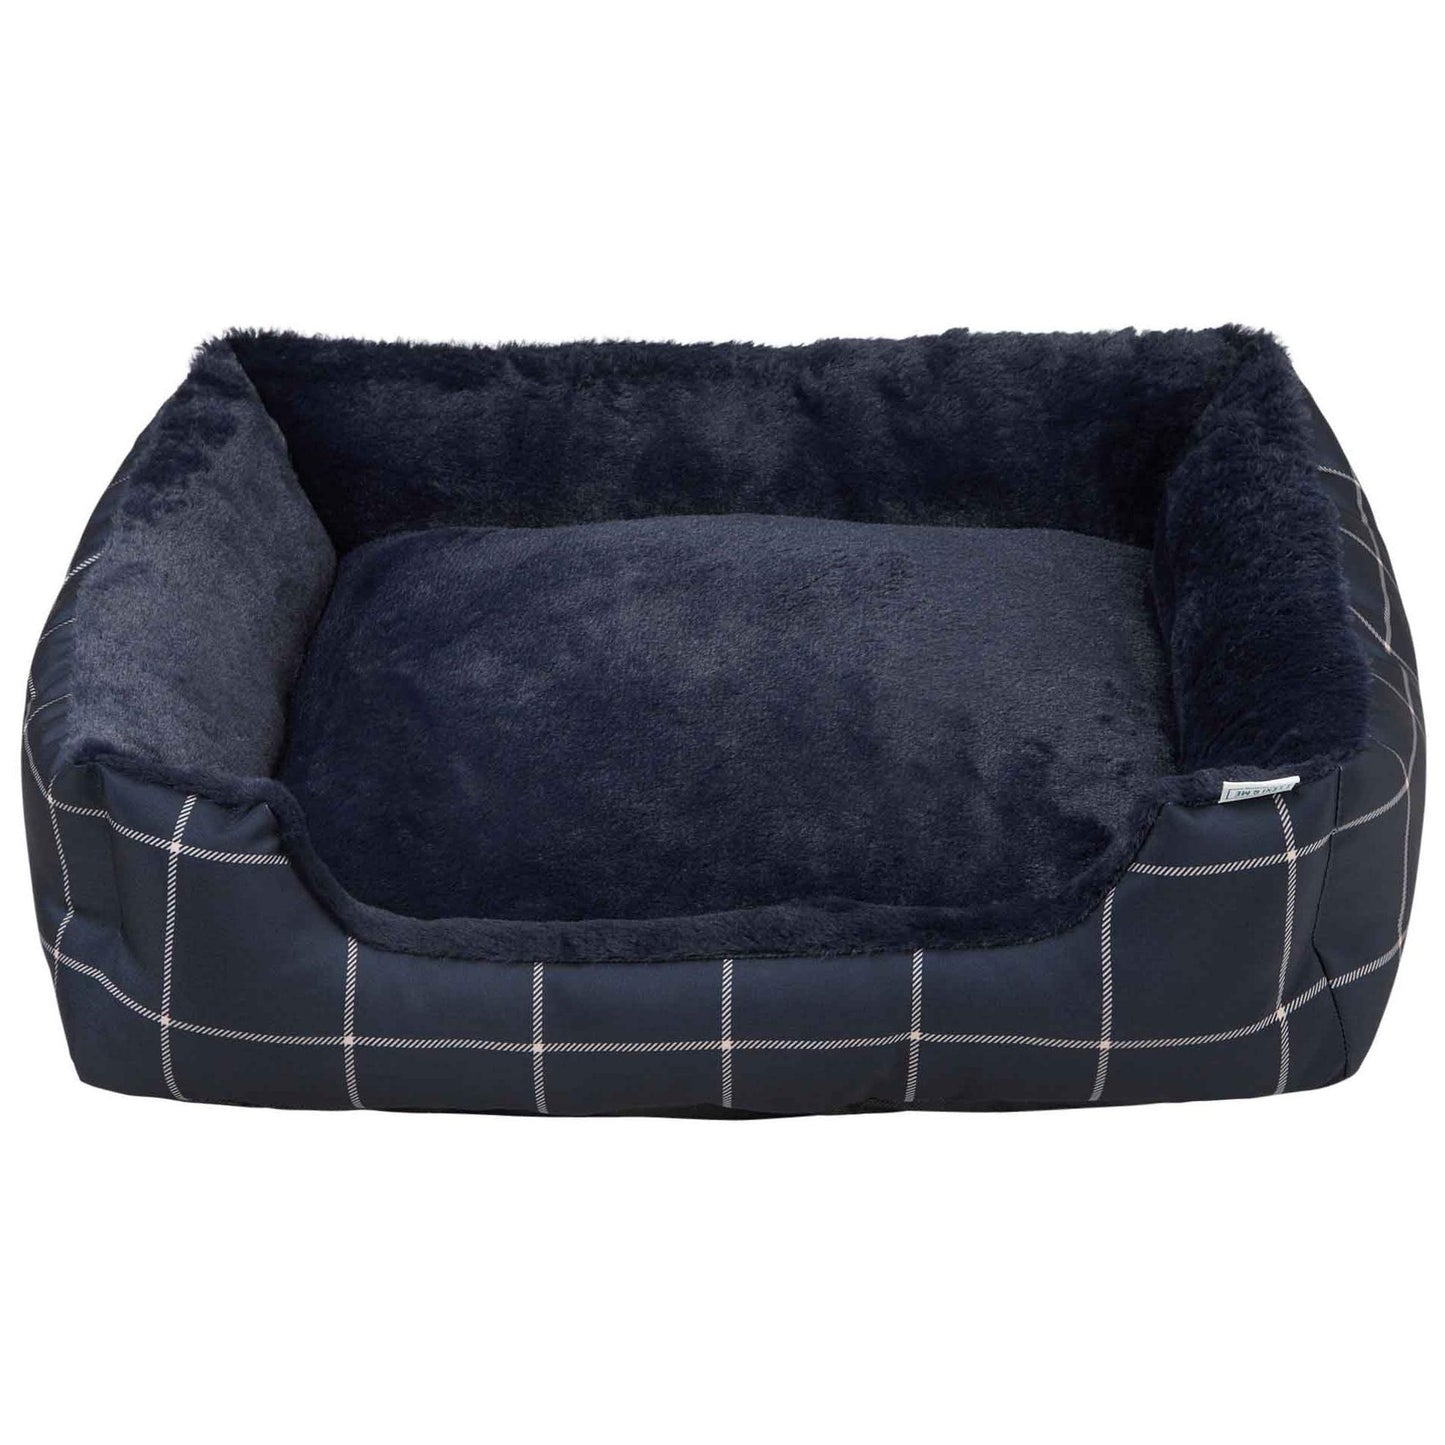 Lexi & Me Bolster Bed French Navy